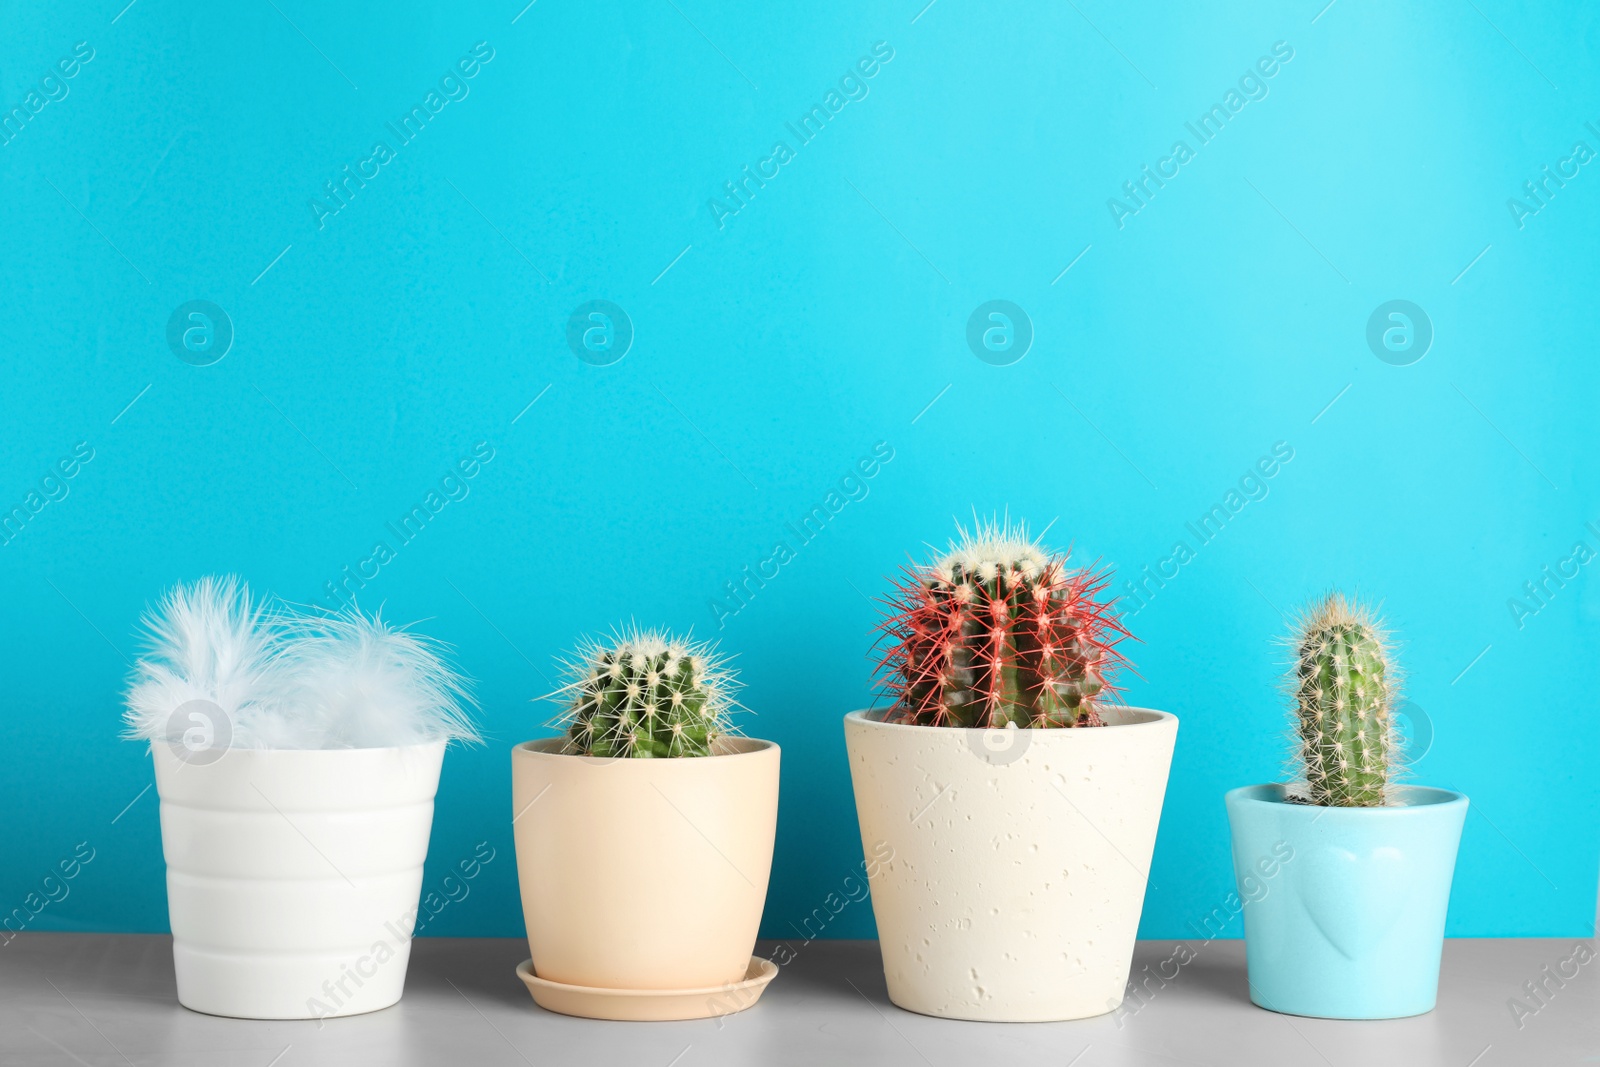 Photo of Pots with cacti and one with feathers on table against color background